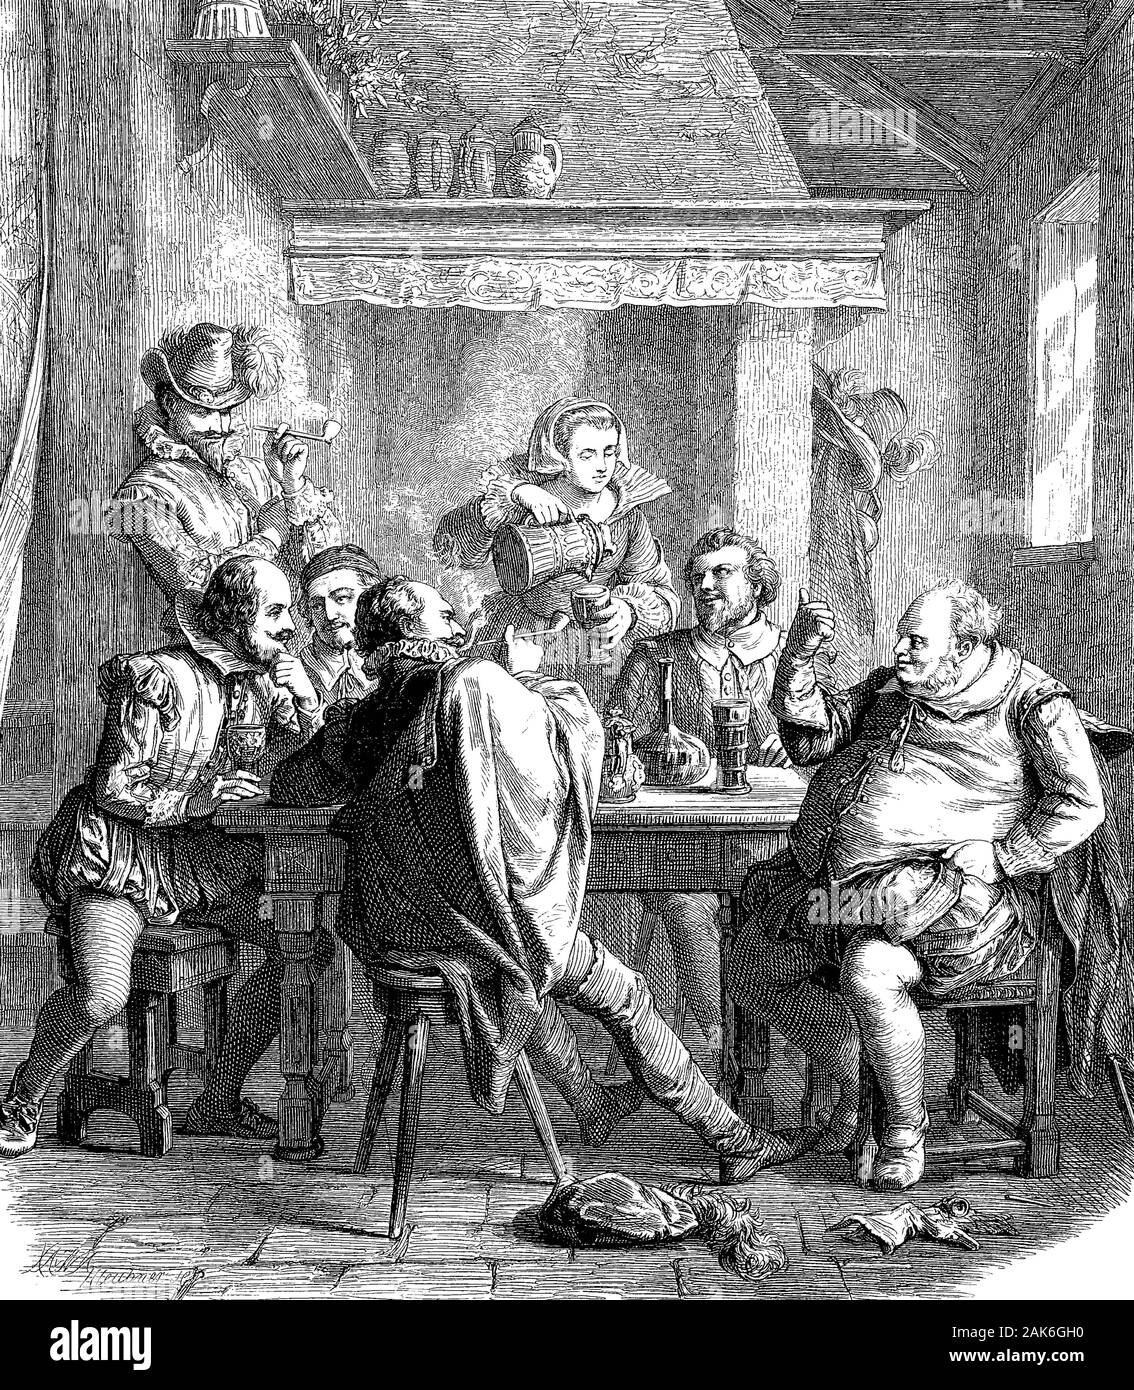 William Shakespeare with friends in the tavern 'for Mermaid', woodcut from 1864 Stock Photo